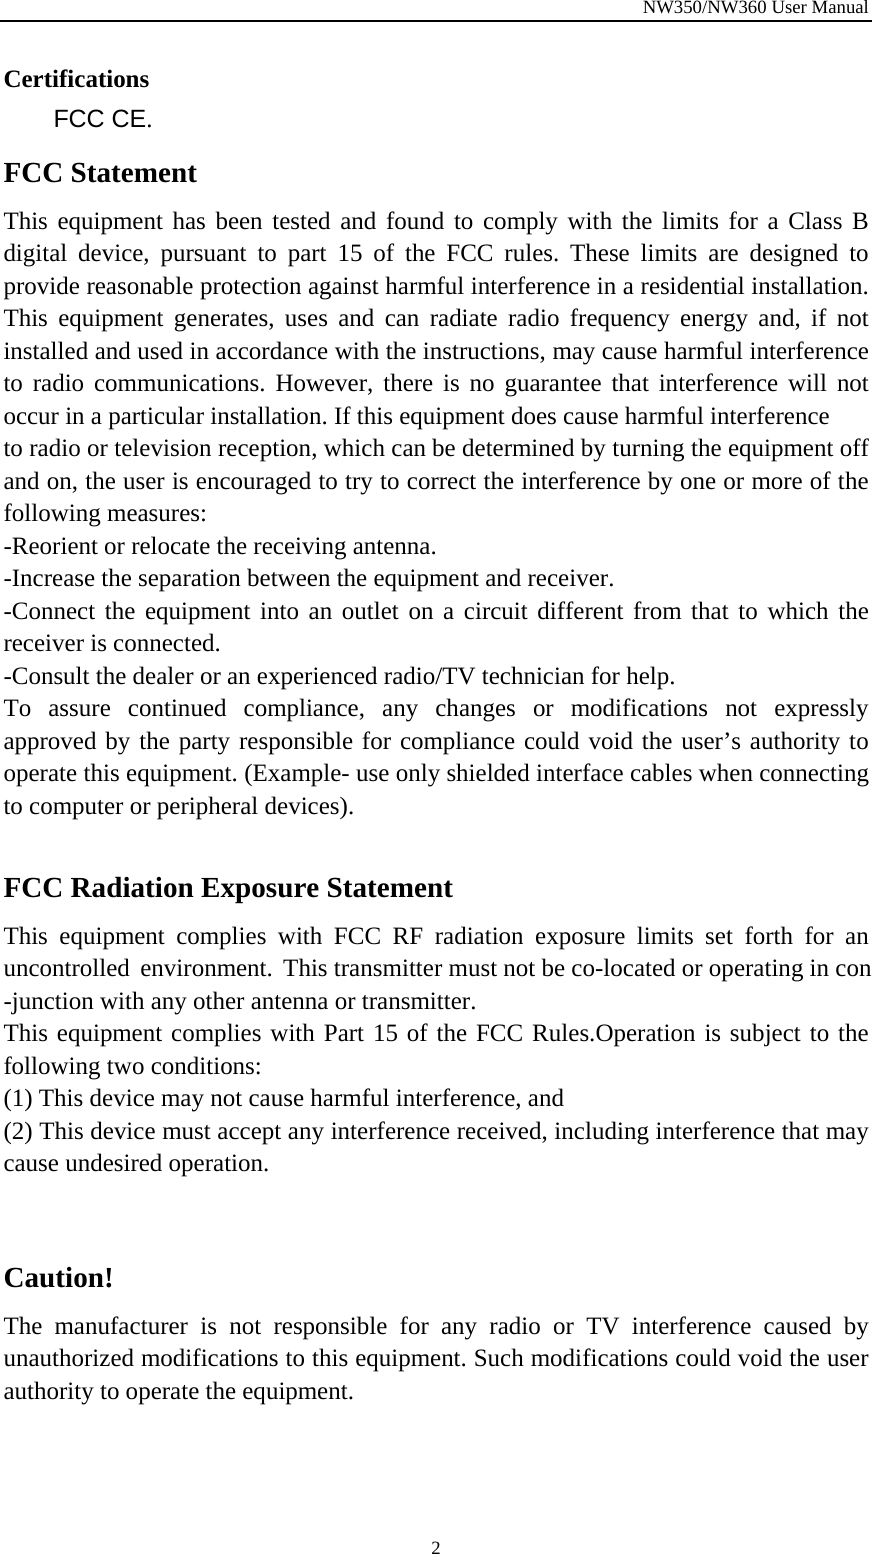 NW350/NW360 User Manual  2Certifications FCC CE. FCC Statement This equipment has been tested and found to comply with the limits for a Class B digital device, pursuant to part 15 of the FCC rules. These limits are designed to provide reasonable protection against harmful interference in a residential installation. This equipment generates, uses and can radiate radio frequency energy and, if not installed and used in accordance with the instructions, may cause harmful interference to radio communications. However, there is no guarantee that interference will not occur in a particular installation. If this equipment does cause harmful interference   to radio or television reception, which can be determined by turning the equipment off and on, the user is encouraged to try to correct the interference by one or more of the following measures: -Reorient or relocate the receiving antenna. -Increase the separation between the equipment and receiver. -Connect the equipment into an outlet on a circuit different from that to which the receiver is connected. -Consult the dealer or an experienced radio/TV technician for help. To assure continued compliance, any changes or modifications not expressly approved by the party responsible for compliance could void the user’s authority to operate this equipment. (Example- use only shielded interface cables when connecting to computer or peripheral devices).  FCC Radiation Exposure Statement       This equipment complies with FCC RF radiation exposure limits set forth for an uncontrolled environment. This transmitter must not be co-located or operating in con-junction with any other antenna or transmitter.  This equipment complies with Part 15 of the FCC Rules.Operation is subject to the following two conditions:     (1) This device may not cause harmful interference, and     (2) This device must accept any interference received, including interference that may cause undesired operation.       Caution!  The manufacturer is not responsible for any radio or TV interference caused by unauthorized modifications to this equipment. Such modifications could void the user authority to operate the equipment. 